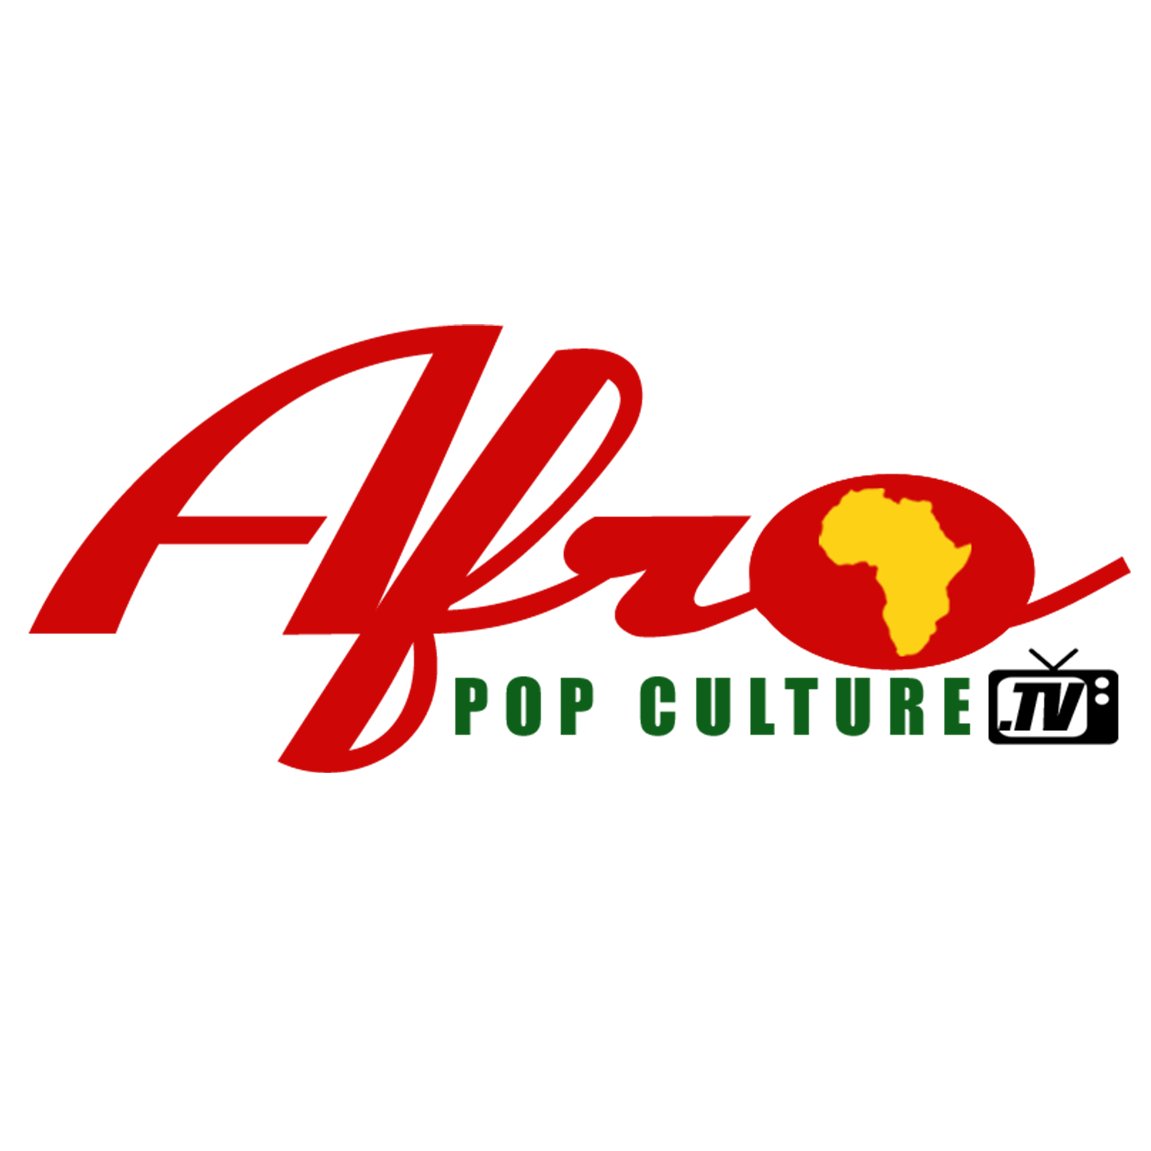 https://t.co/5e619iivB1 - celebrating African popular culture, with interviews, and special features. https://t.co/MVM87f0PCU